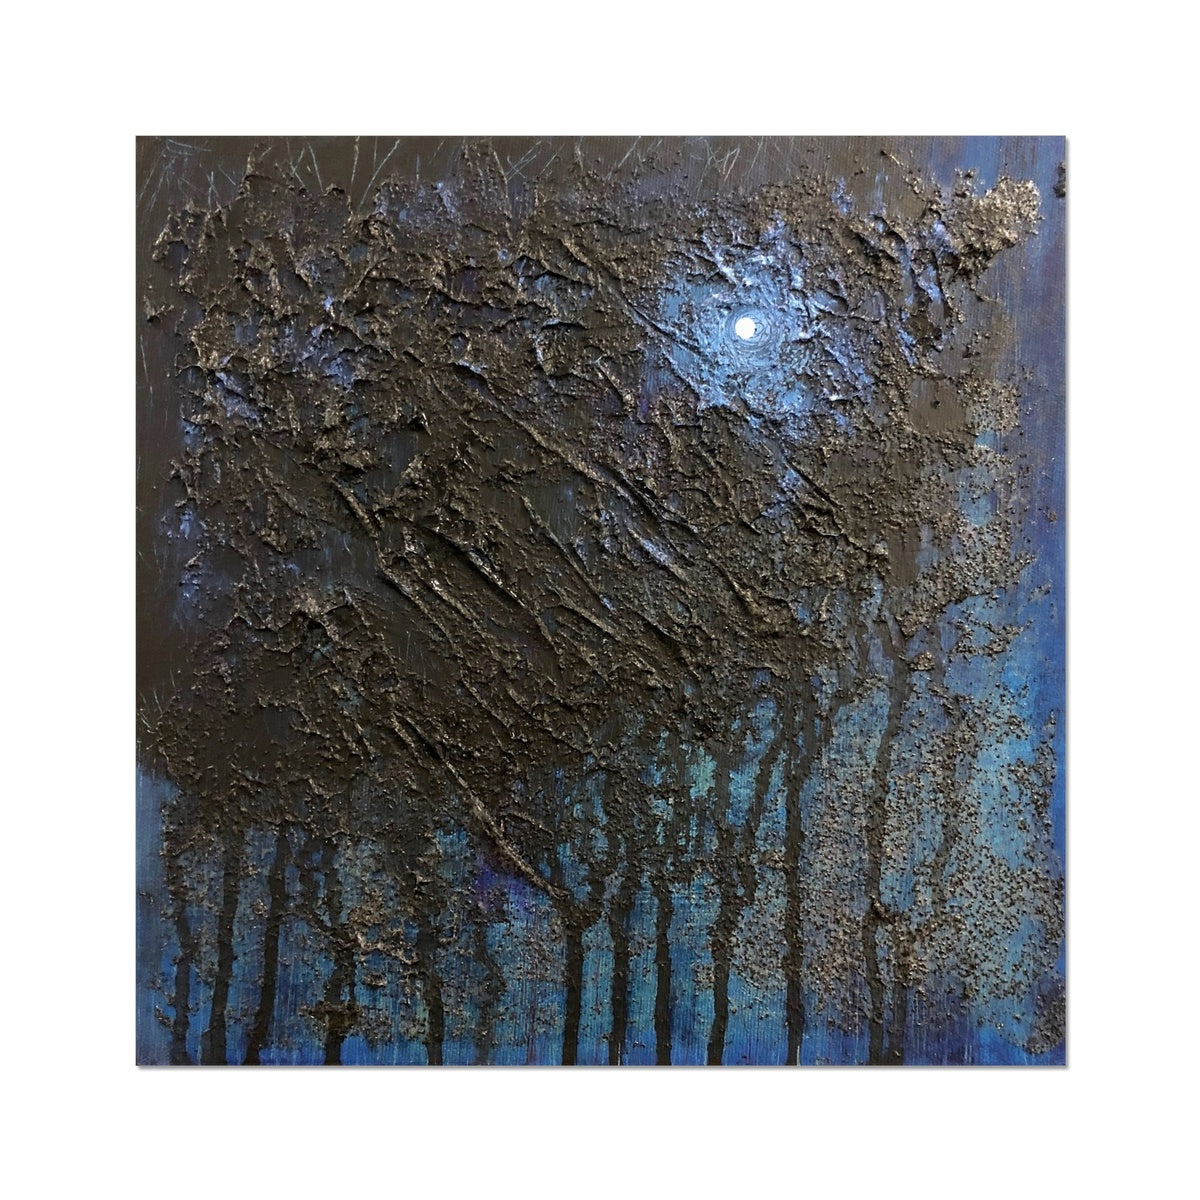 The Blue Moon Wood Abstract Painting | Artist Proof Collector Prints From Scotland-Artist Proof Collector Prints-Abstract & Impressionistic Art Gallery-20"x20"-Paintings, Prints, Homeware, Art Gifts From Scotland By Scottish Artist Kevin Hunter